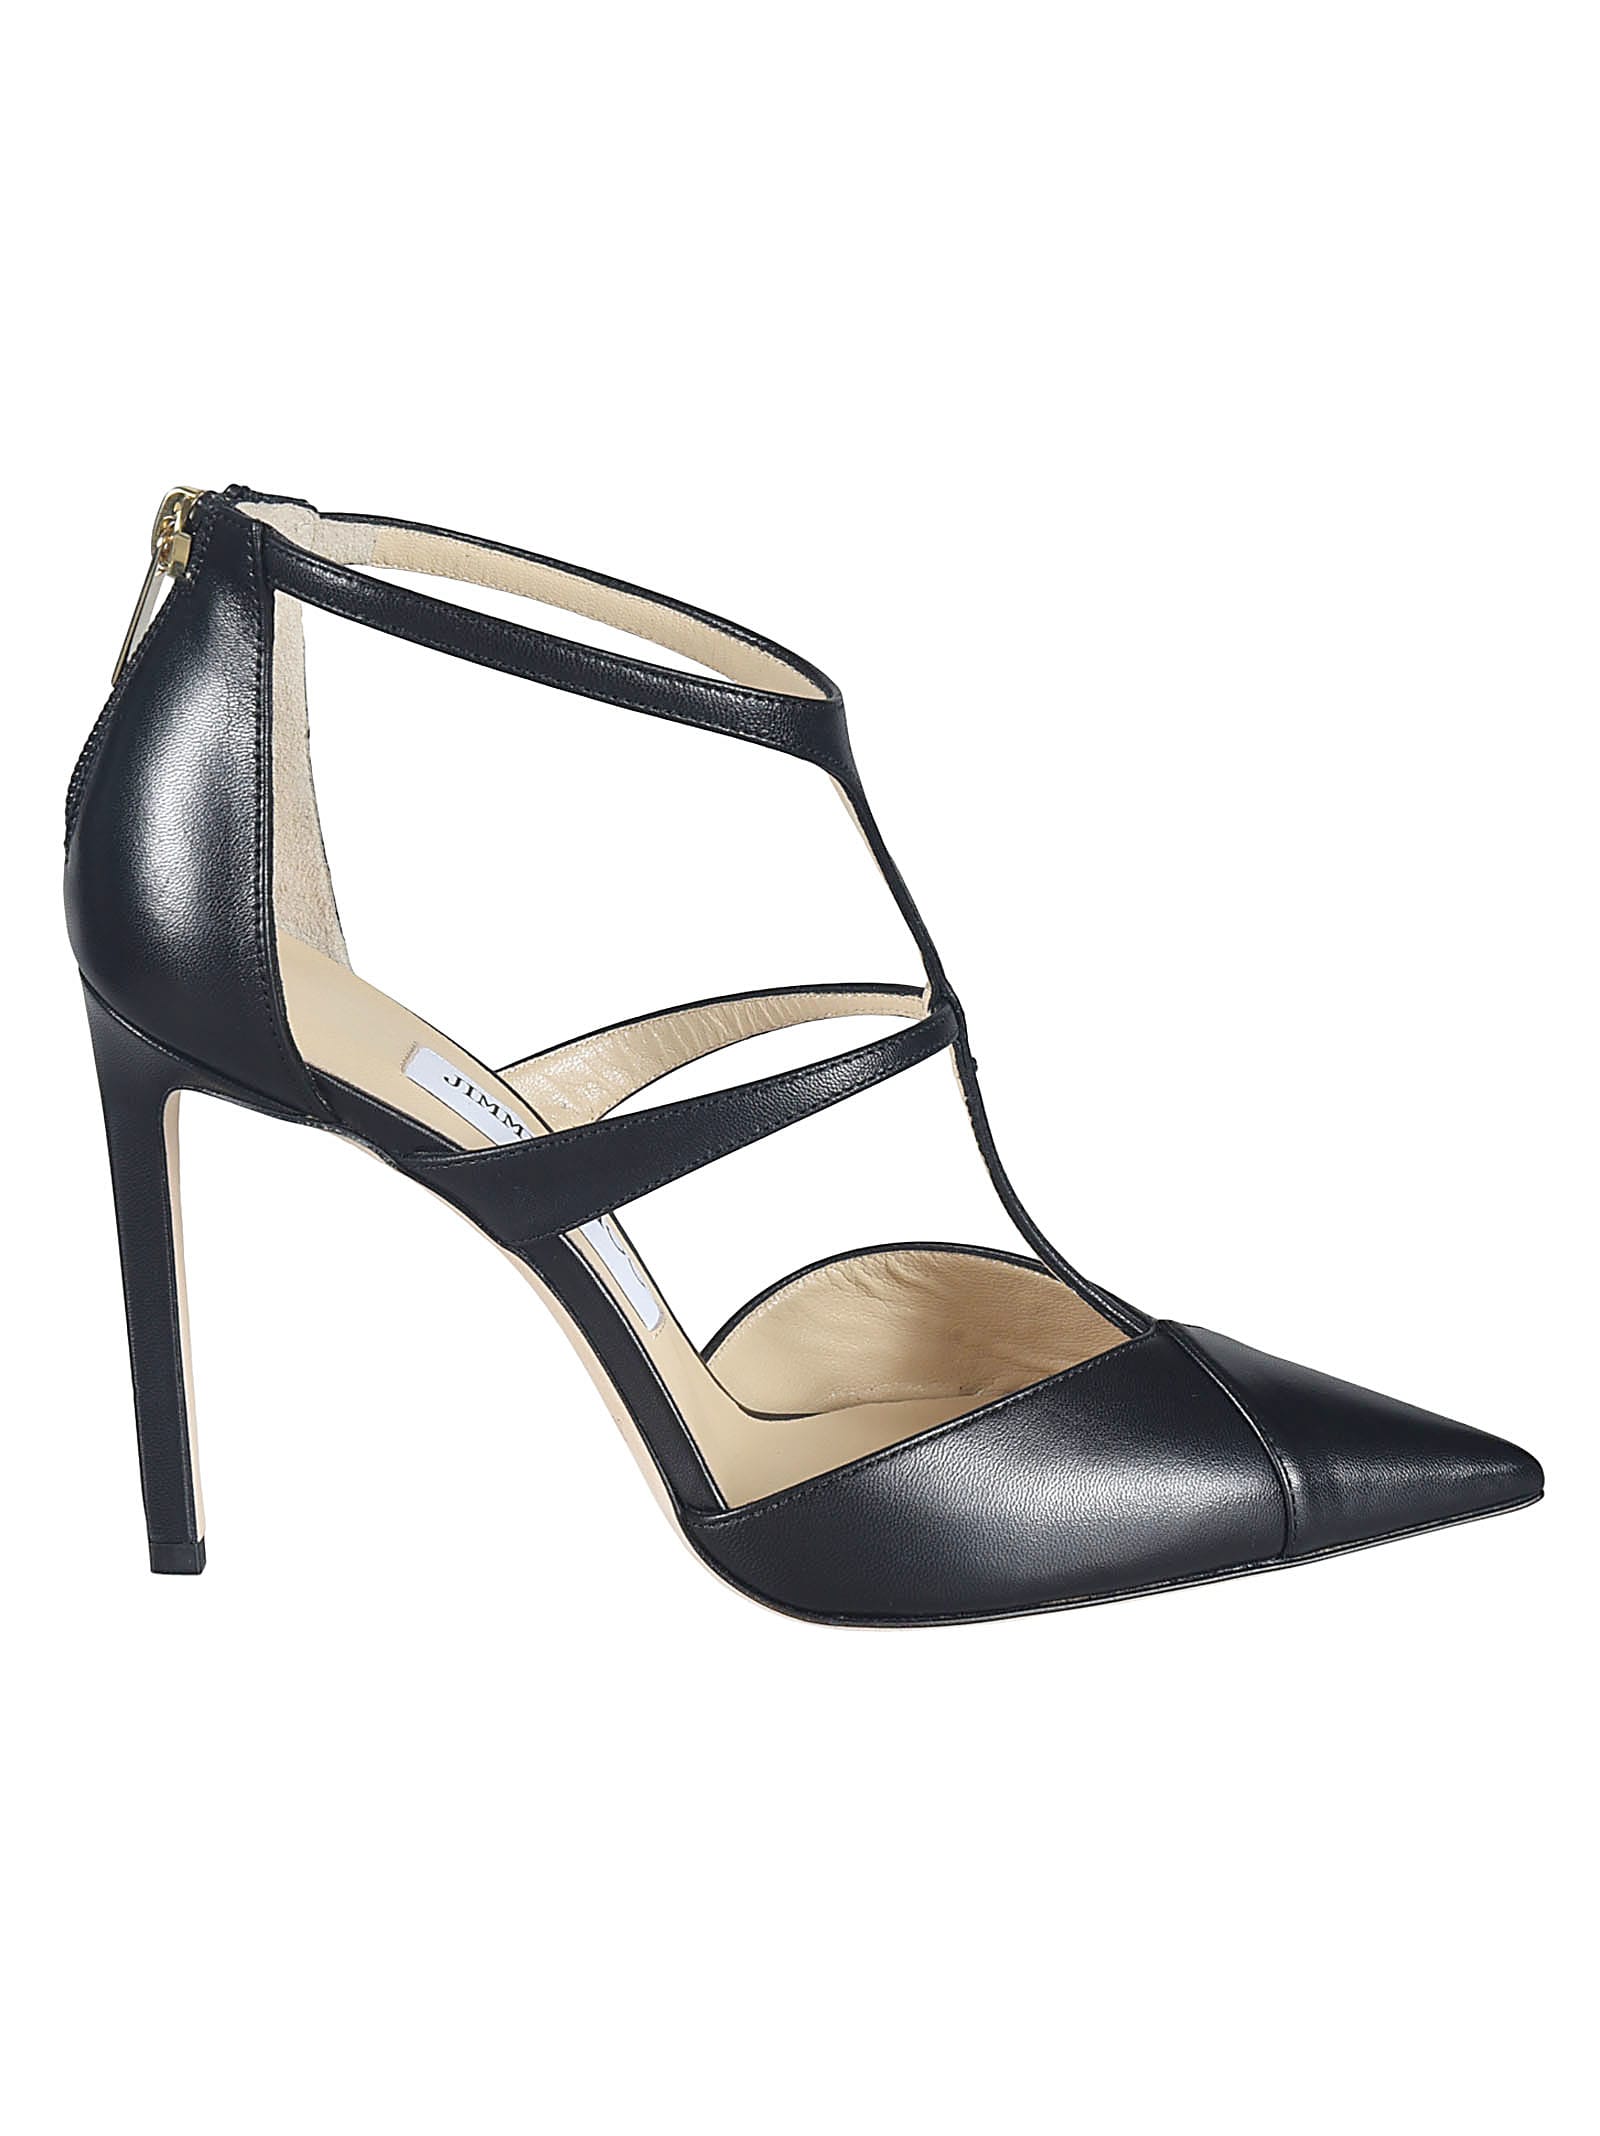 Buy Jimmy Choo Saoni Pumps online, shop Jimmy Choo shoes with free shipping